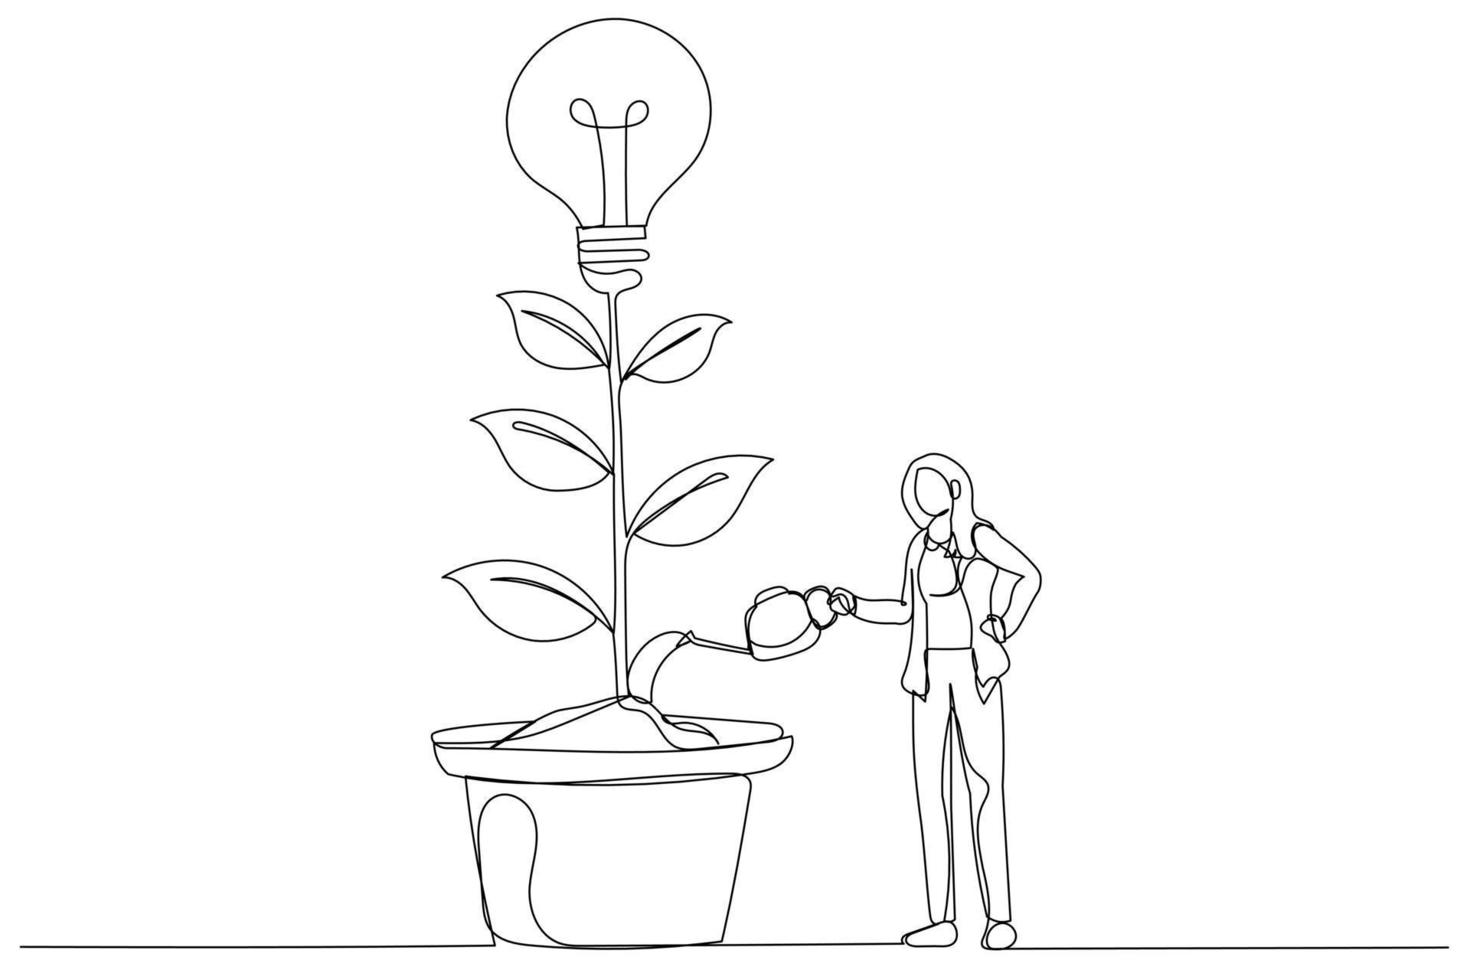 Illustration of businesswoman watering growing tree with lightbulb. People working together. Continuous line art vector